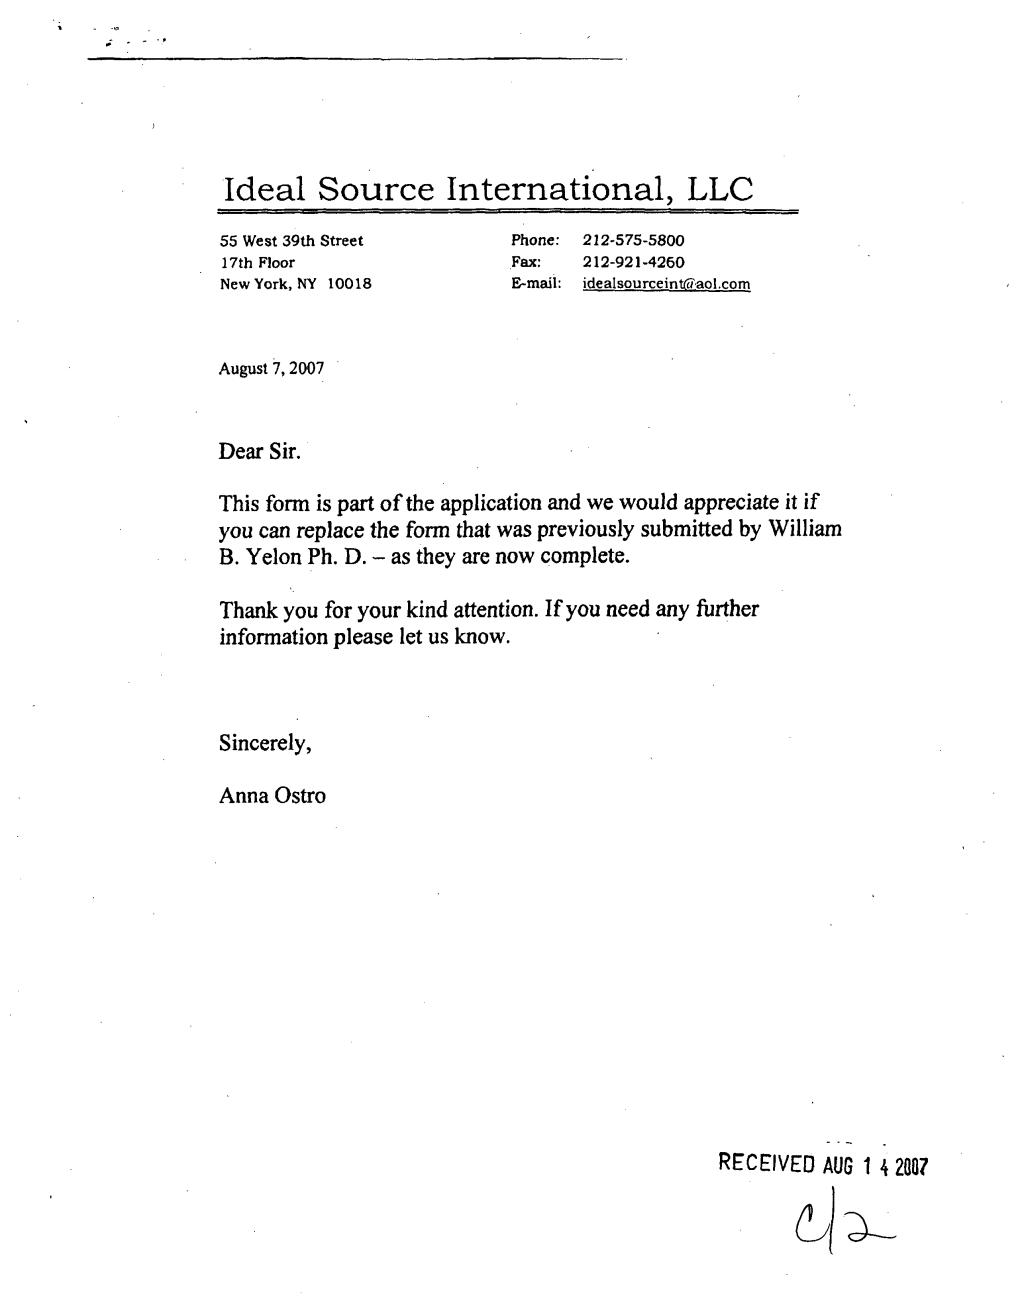 Letter from Anna Ostro, Ideal Source International, RE: License